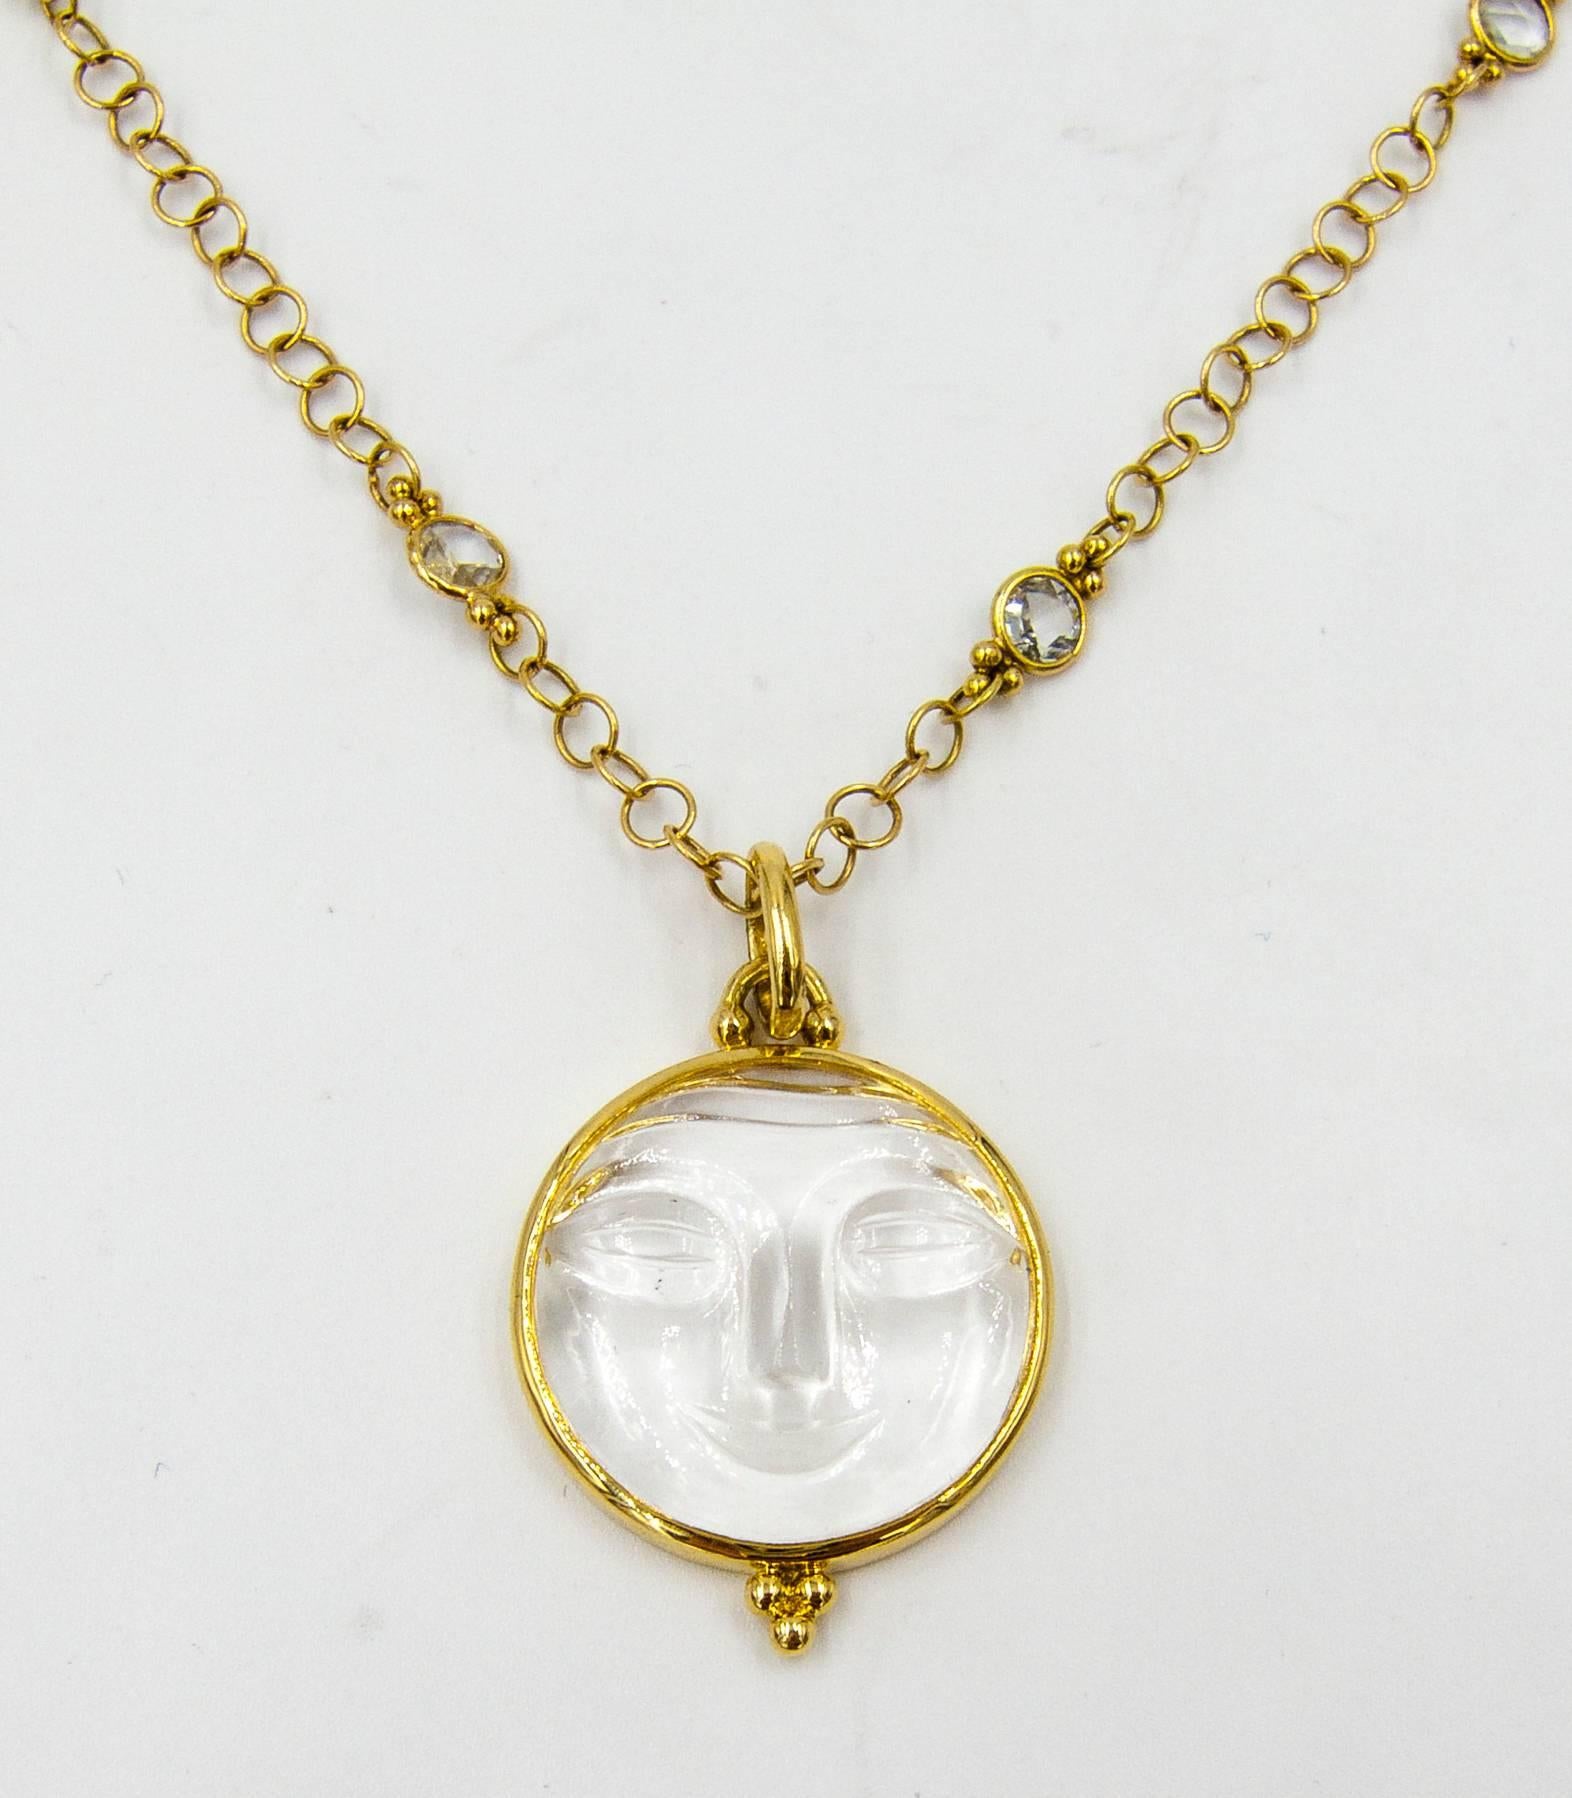 Temple St Clair's inimitable style is clear in this charming and wearable necklace.   The 23